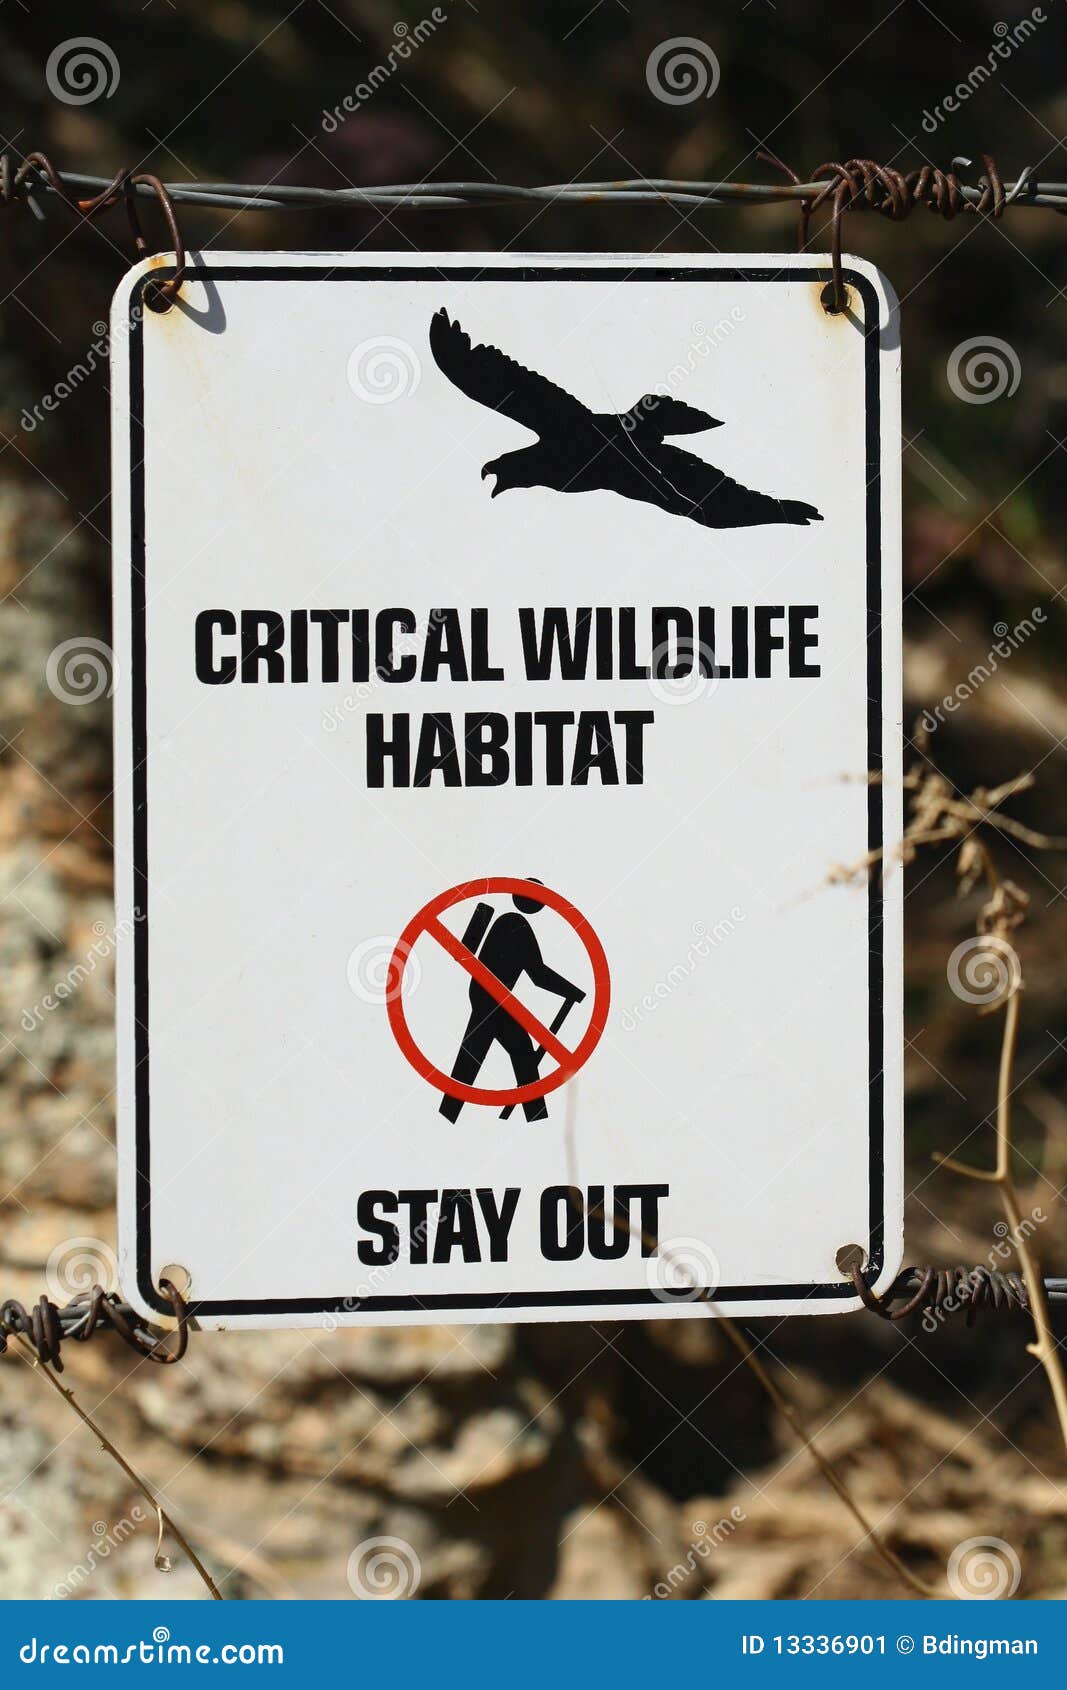 critical wildlife habitat - stay out